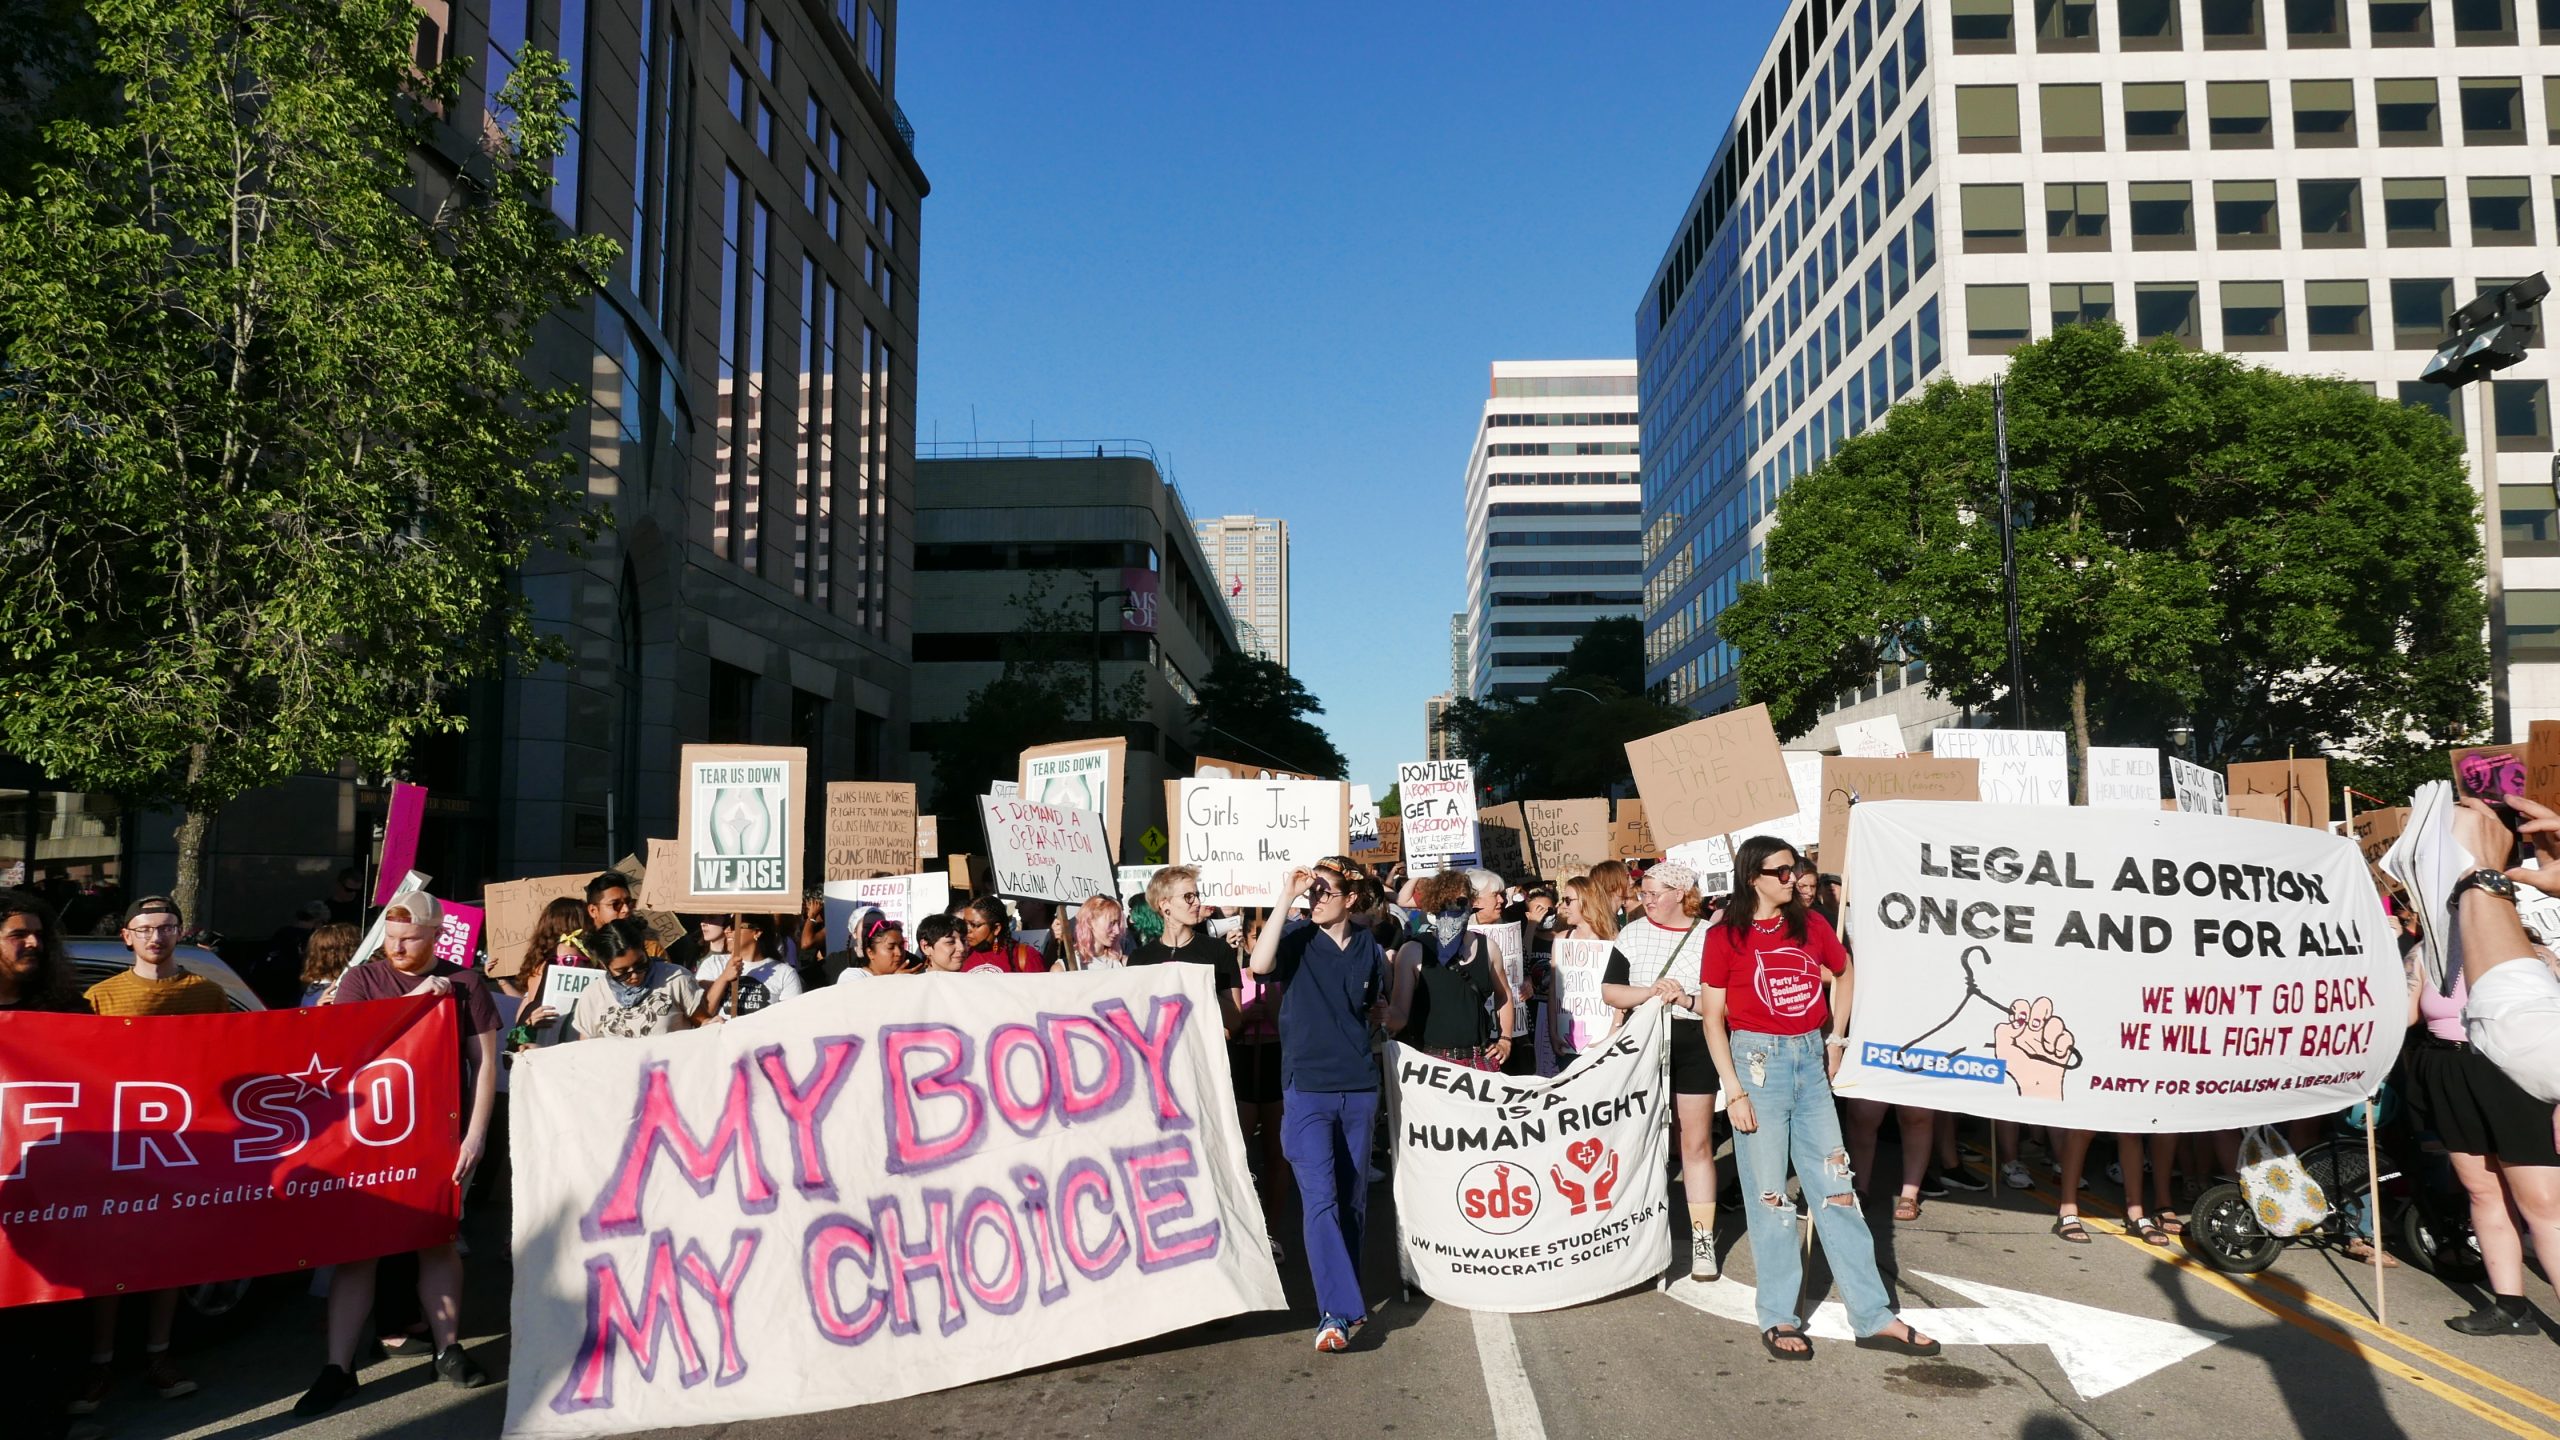 Abortion Rights Protest Calls for Supporters to Organize